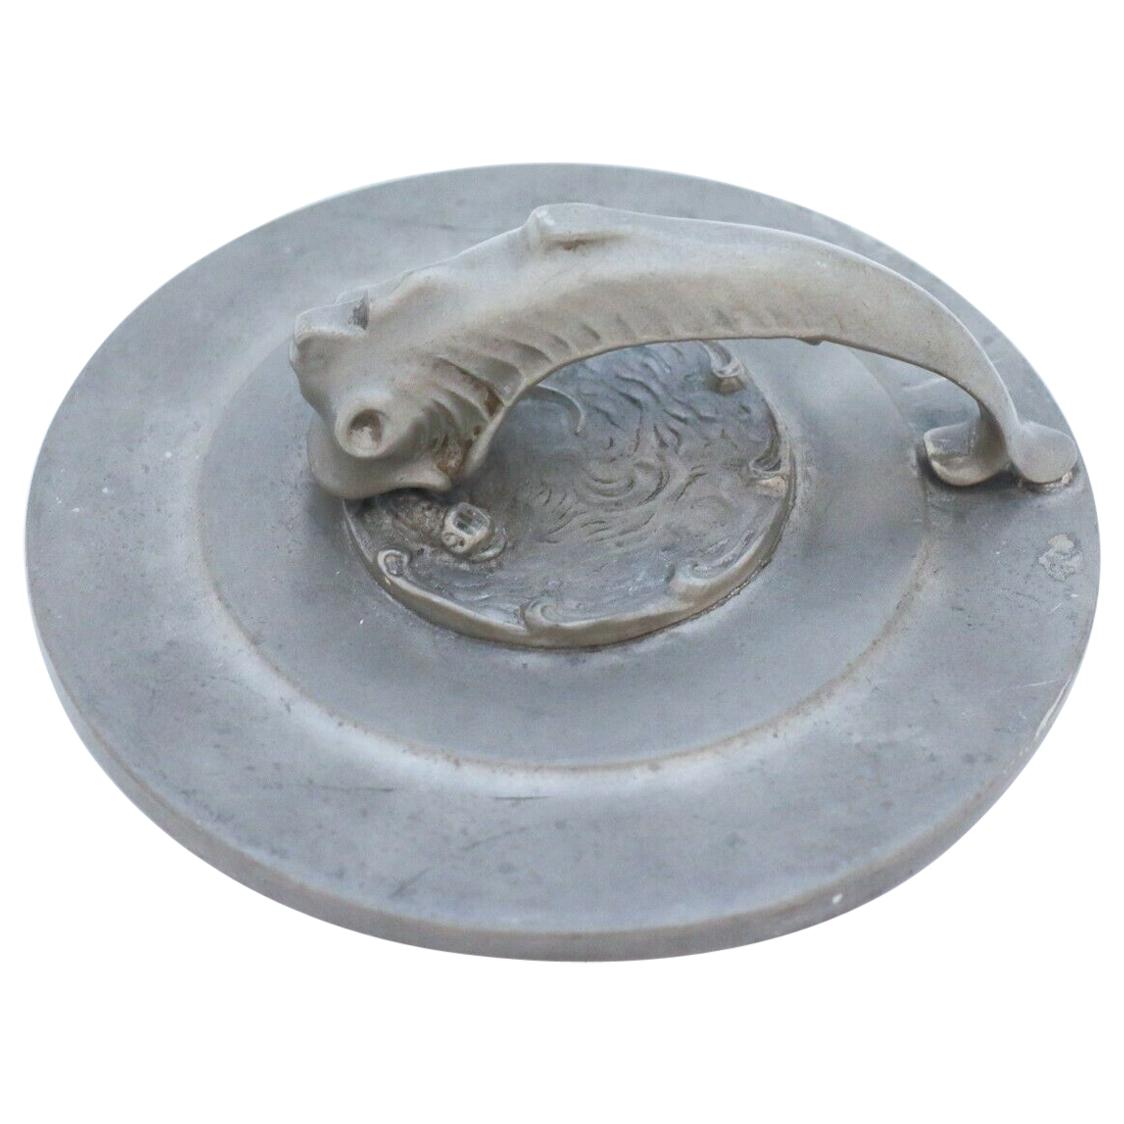 Hand Mirror in Pewter with Decor of Fish, Swedish Art Deco